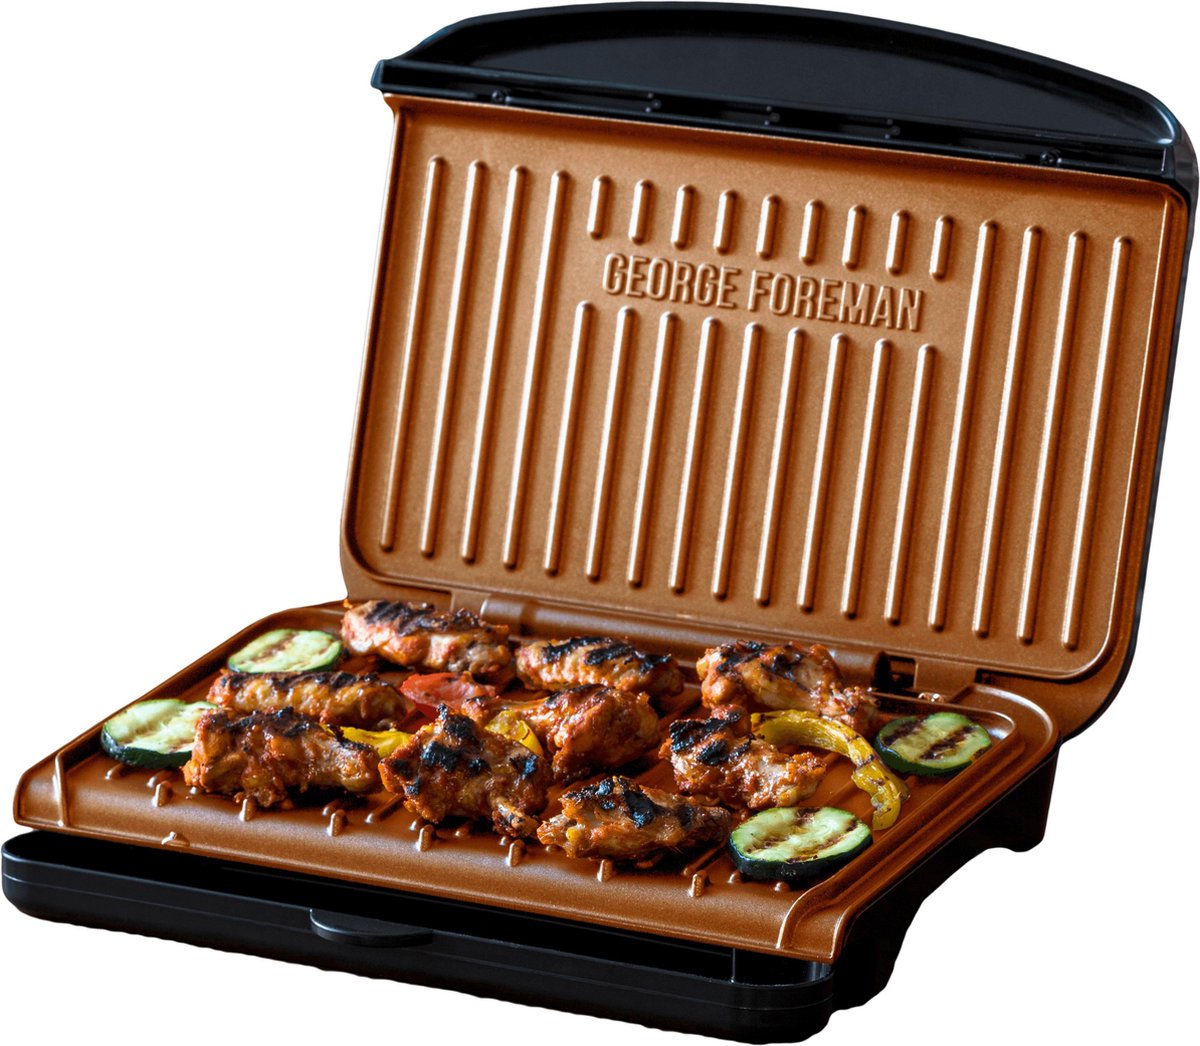 Grill Barbecue Électrique RUSSELL HOBBS 1630W - Noir